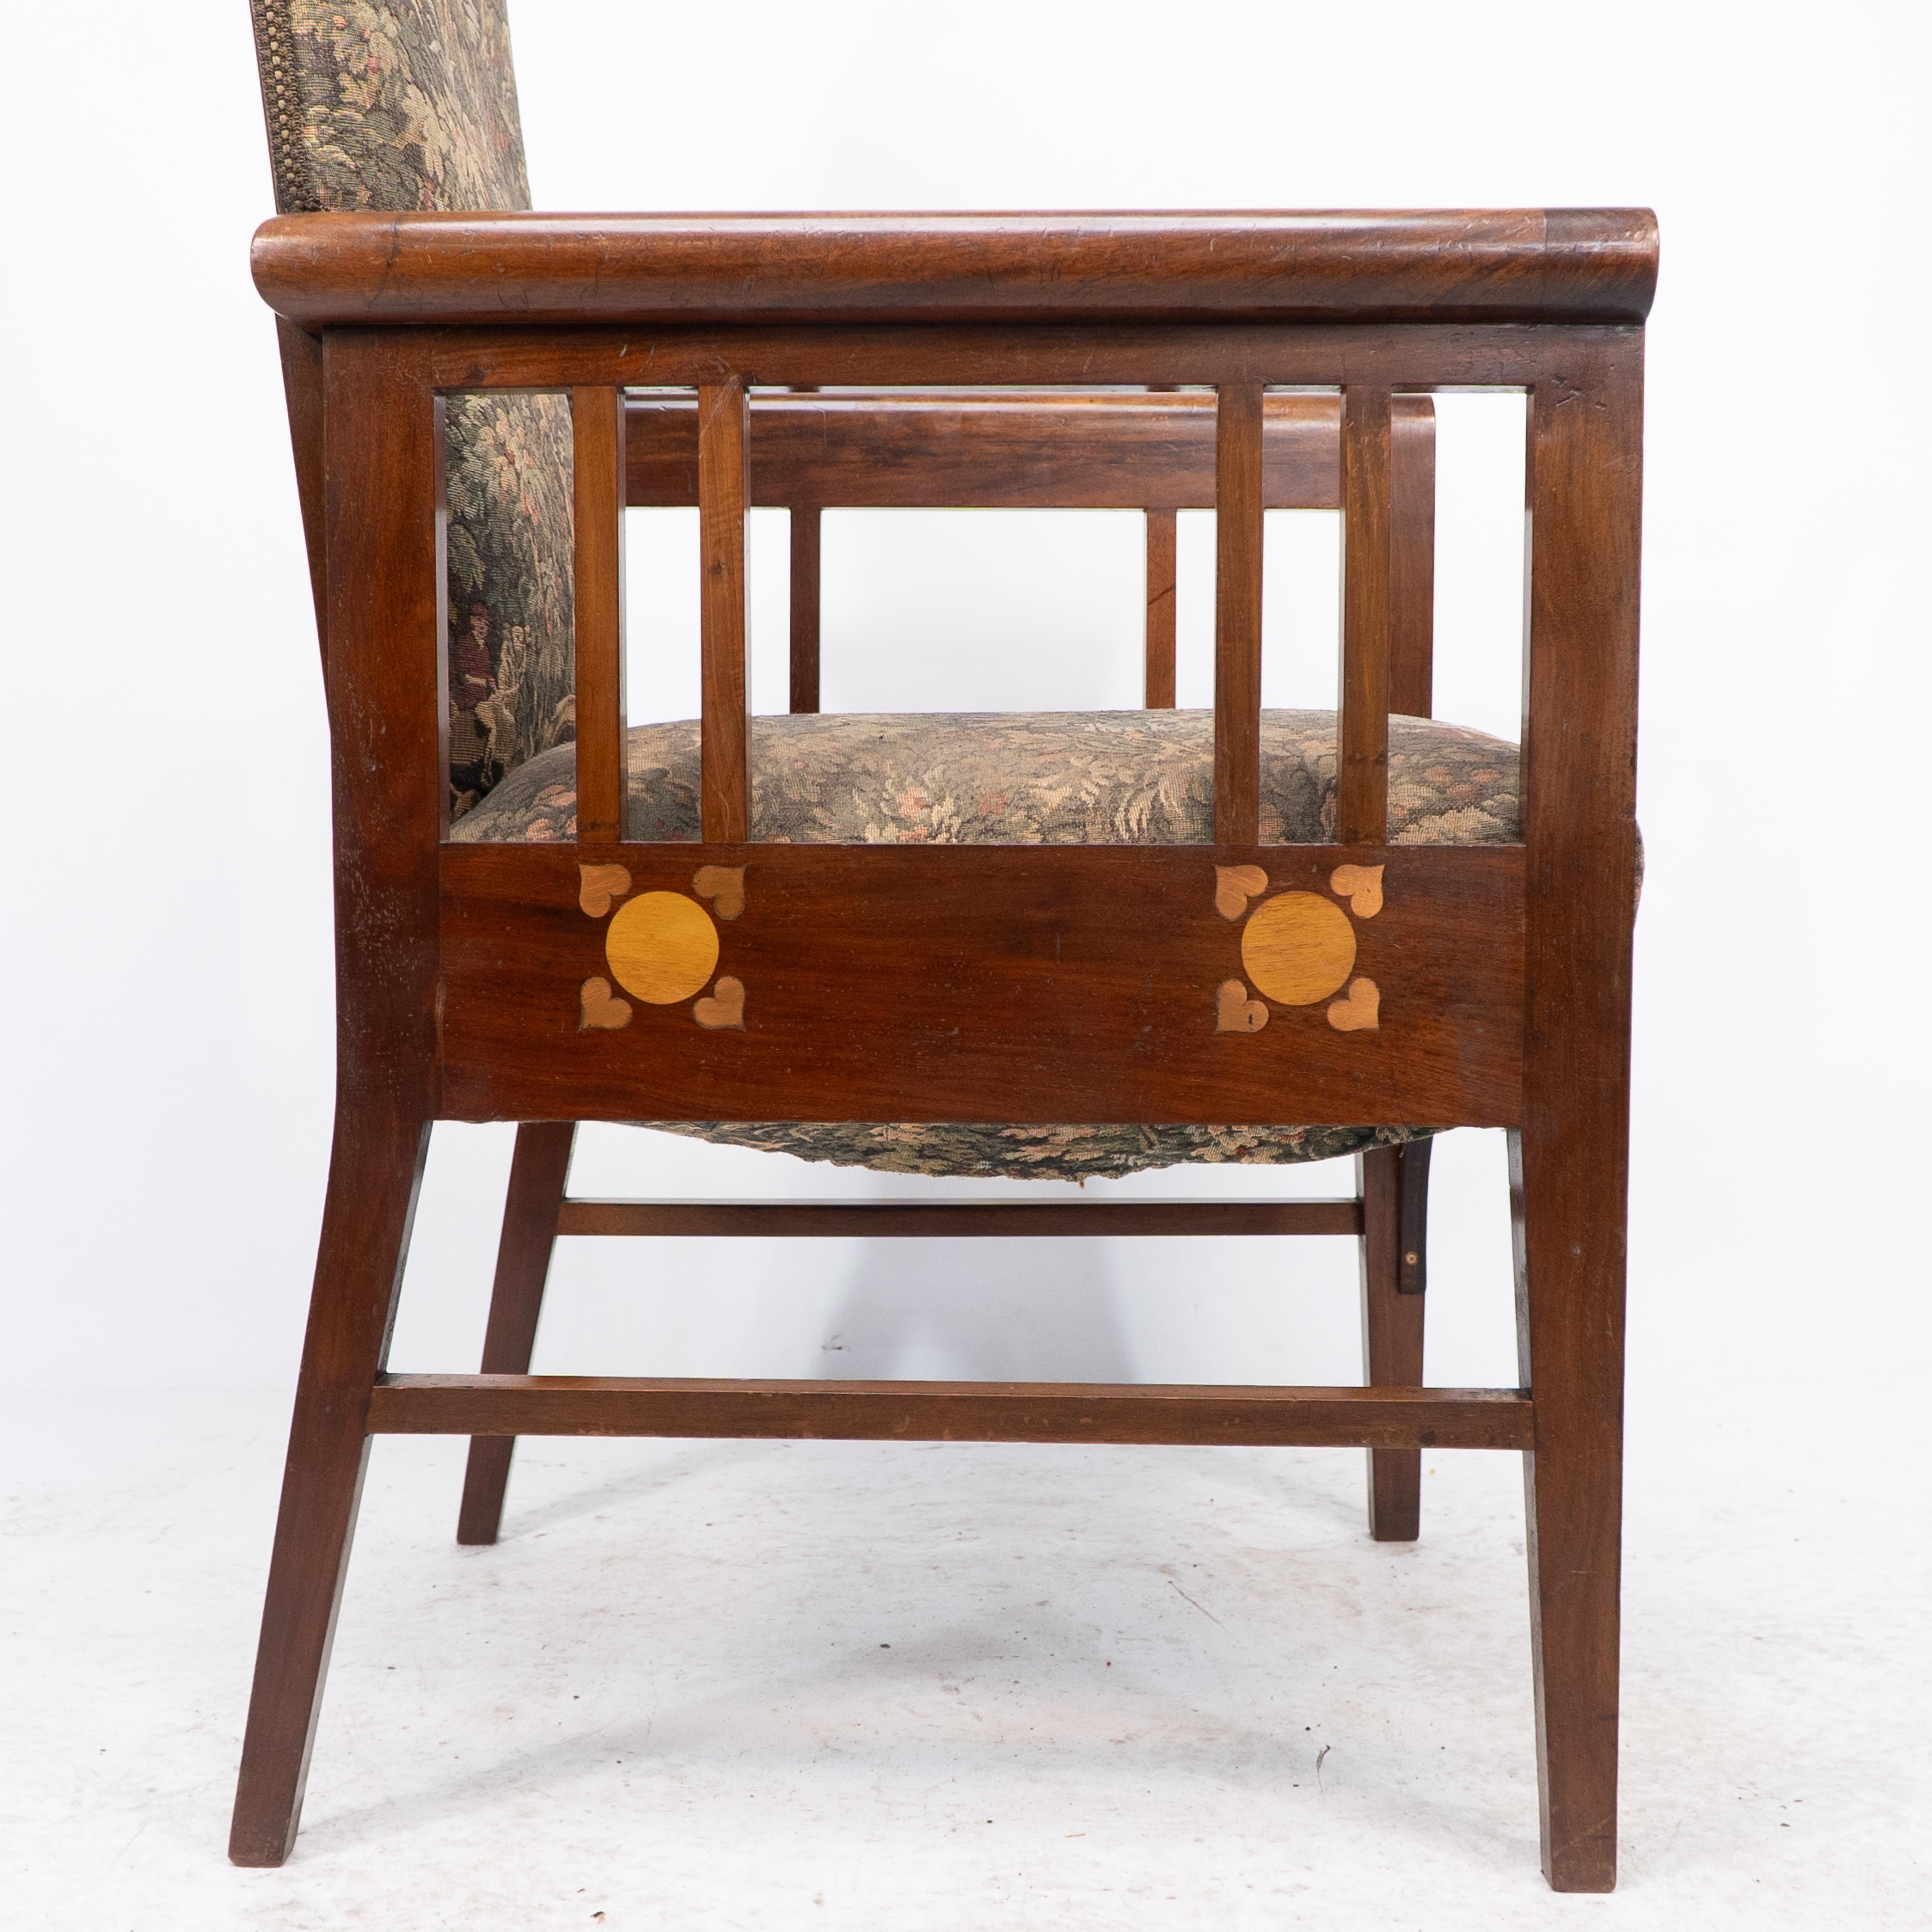 G M Ellwood for J S Henry. A Progressive New Art armchair with fruitwood inlays For Sale 4